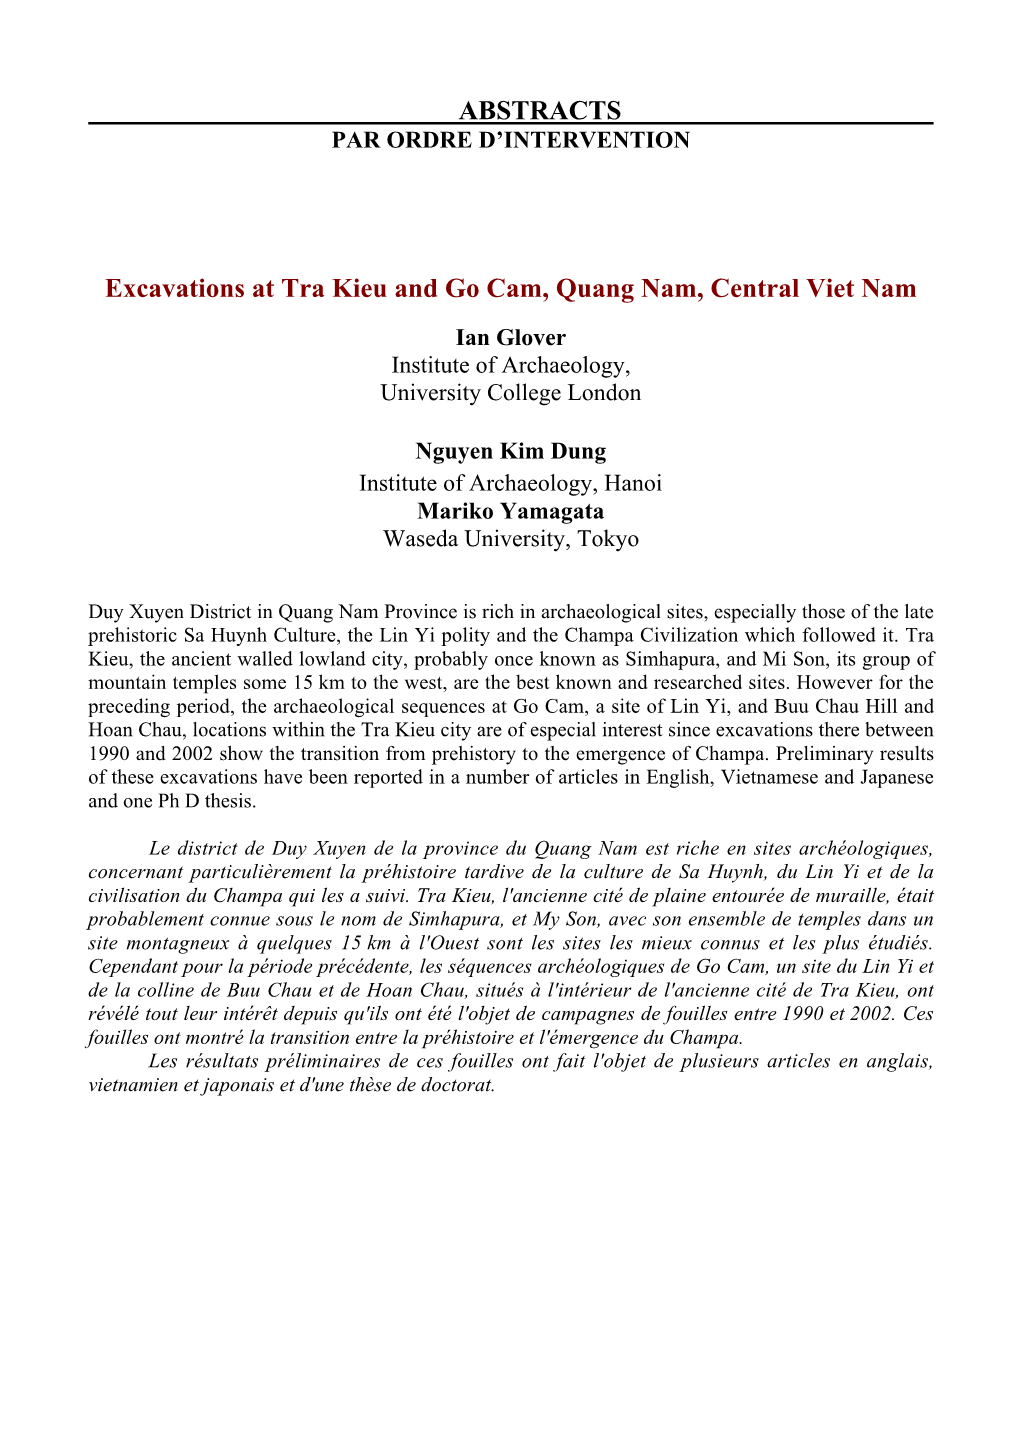 ABSTRACTS Excavations at Tra Kieu and Go Cam, Quang Nam, Central Viet